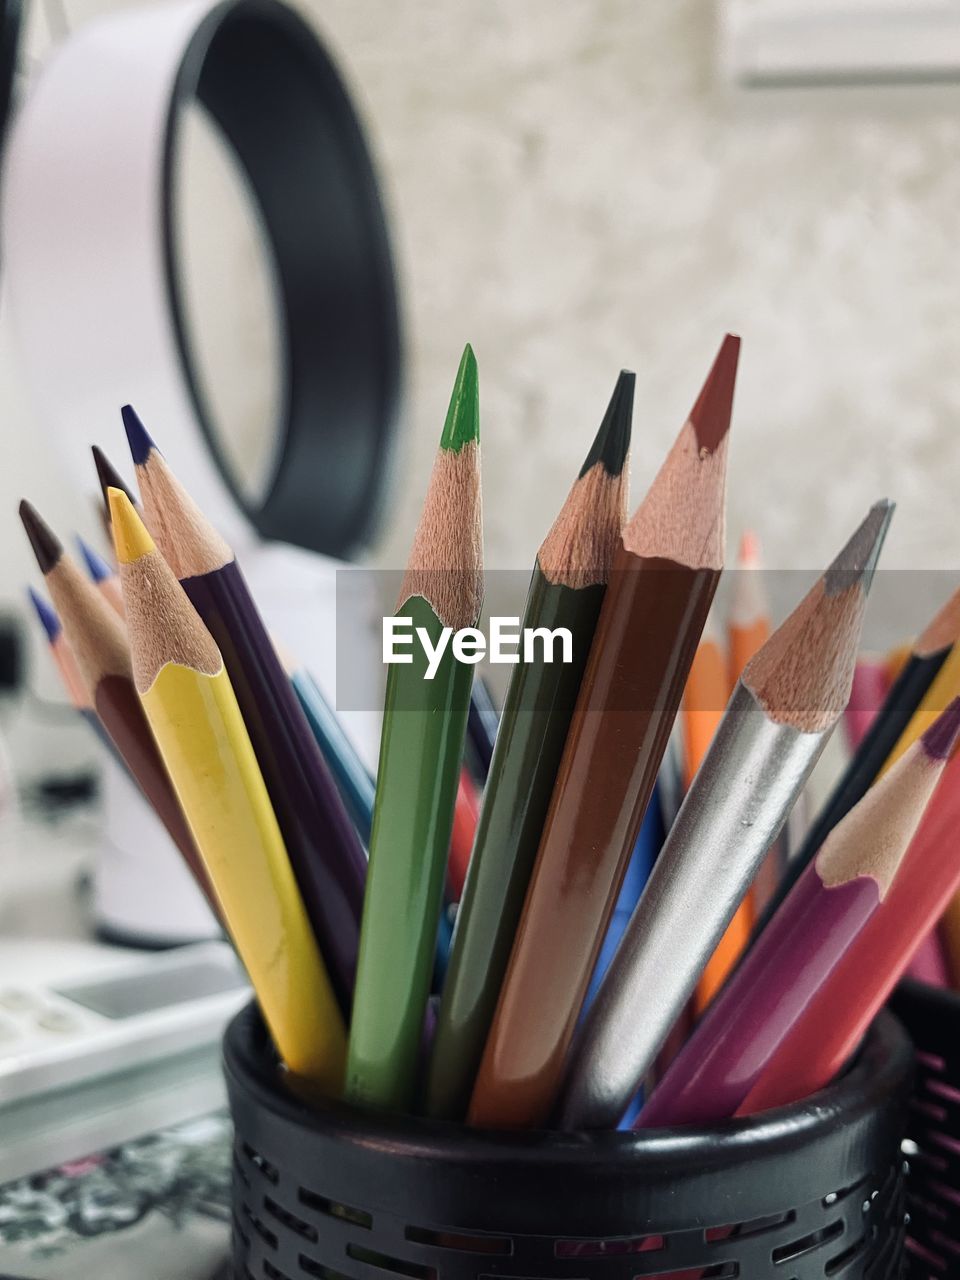 pencil, writing instrument, colored pencil, office supplies, multi colored, indoors, pen, craft, creativity, large group of objects, education, no people, close-up, art and craft equipment, desk organizer, writing, variation, still life, paintbrush, brush, focus on foreground, office, table